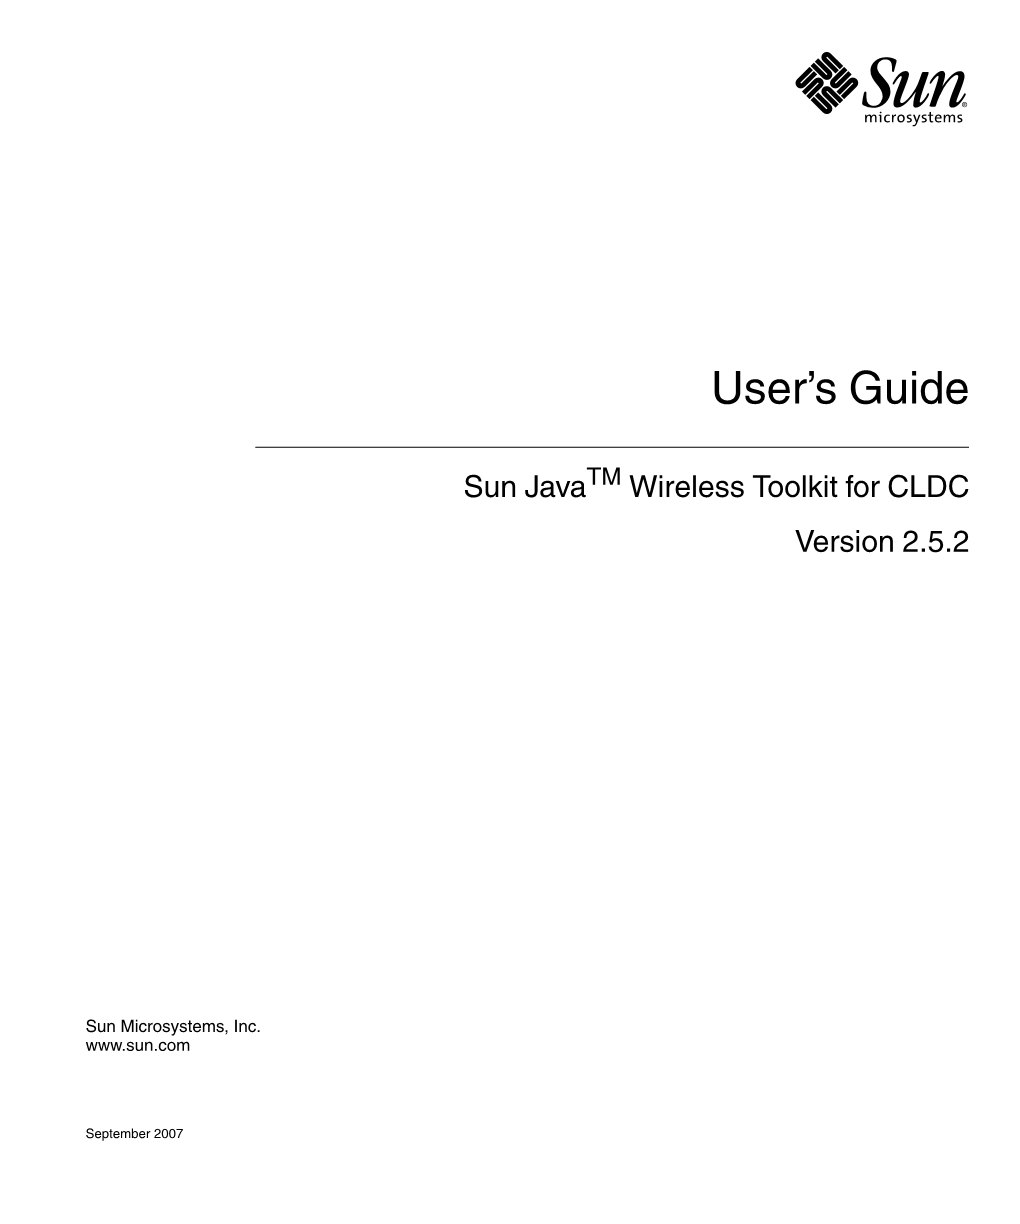 Sun Java Wireless Toolkit for CLDC User's Guide